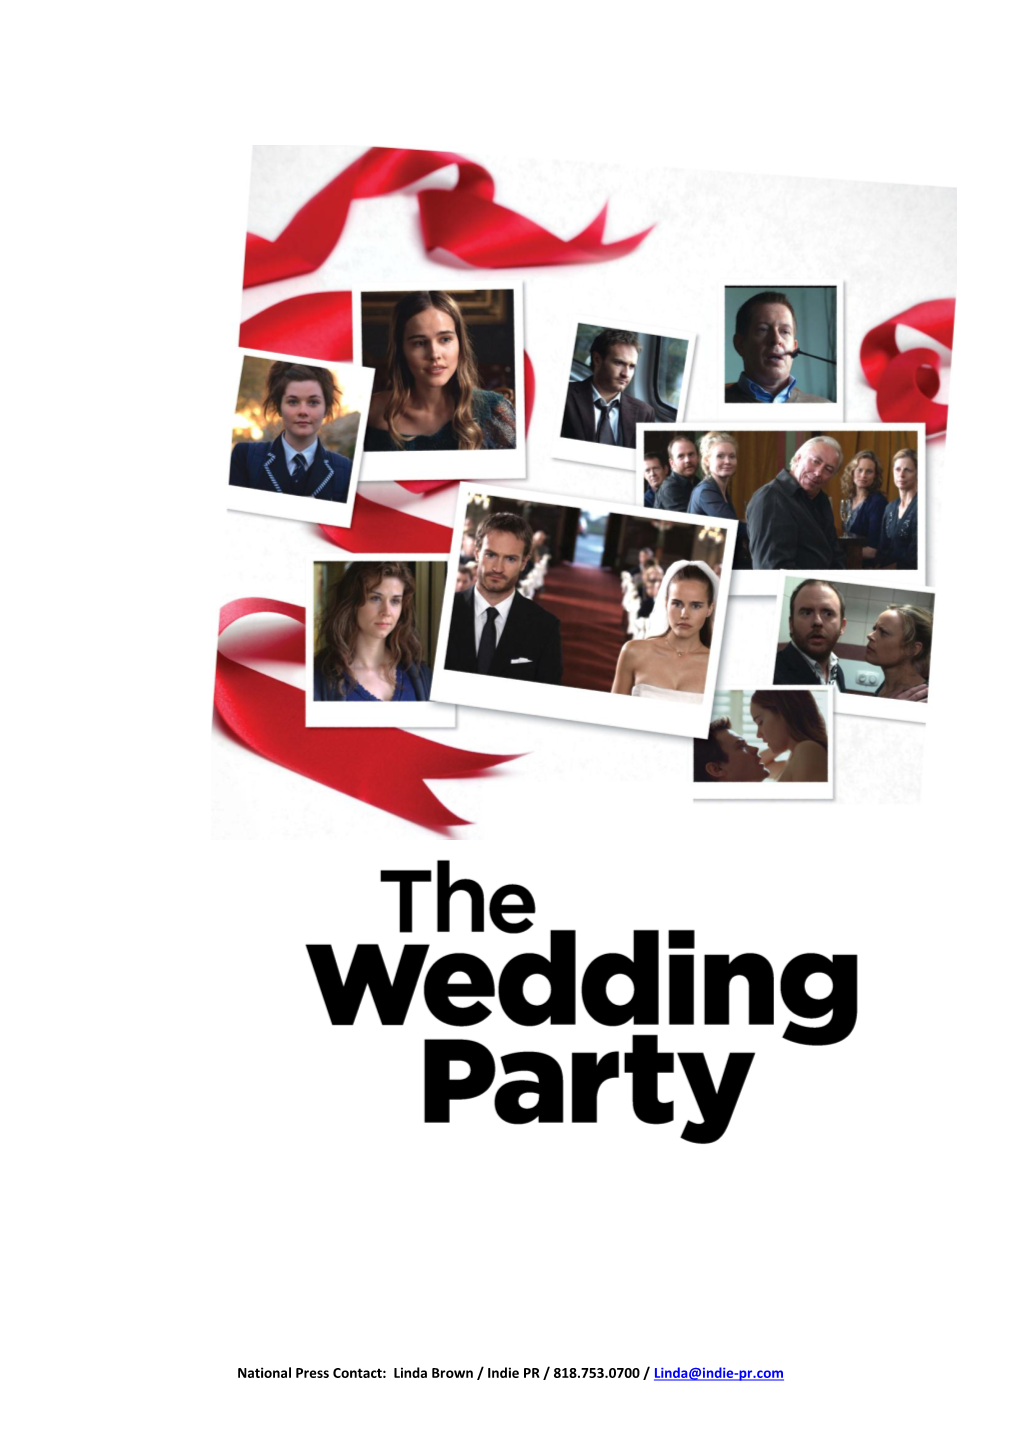 The Wedding Party Explores Everything That Can Go Wrong (And Right) in the Search for Love